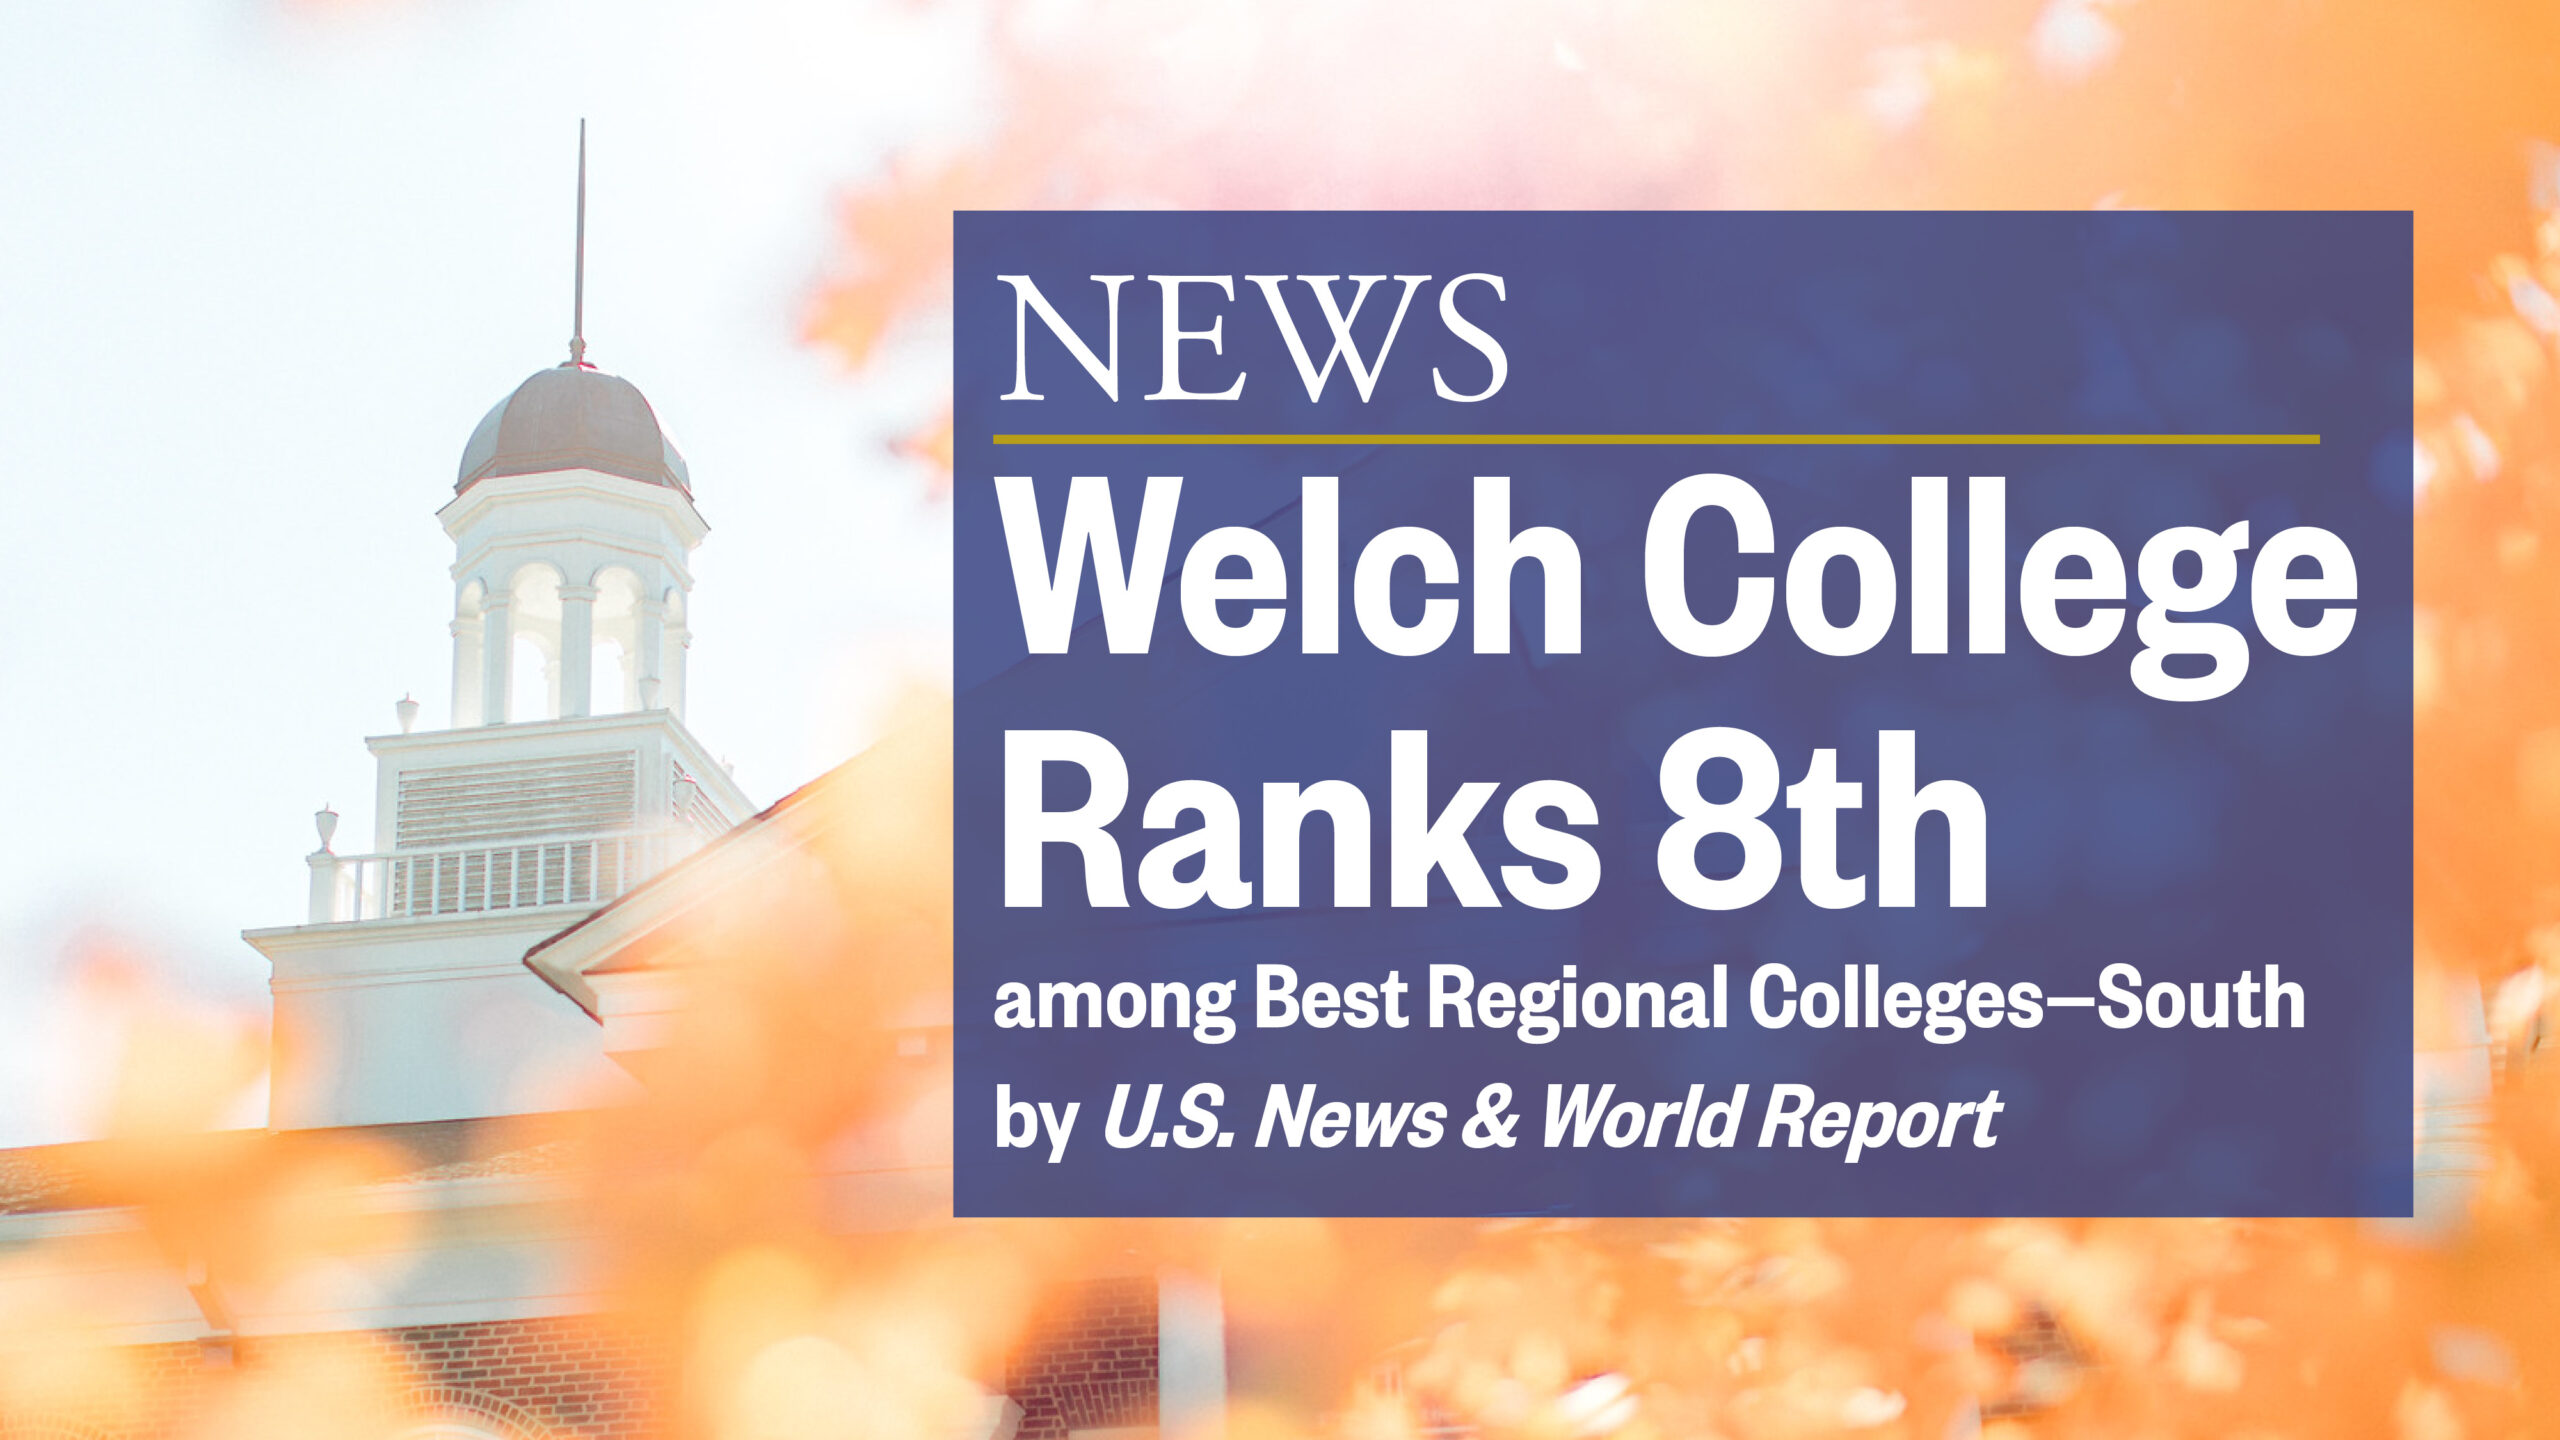 Welch College Ranks 8th among Best Regional Colleges—South by U.S. News & World Report